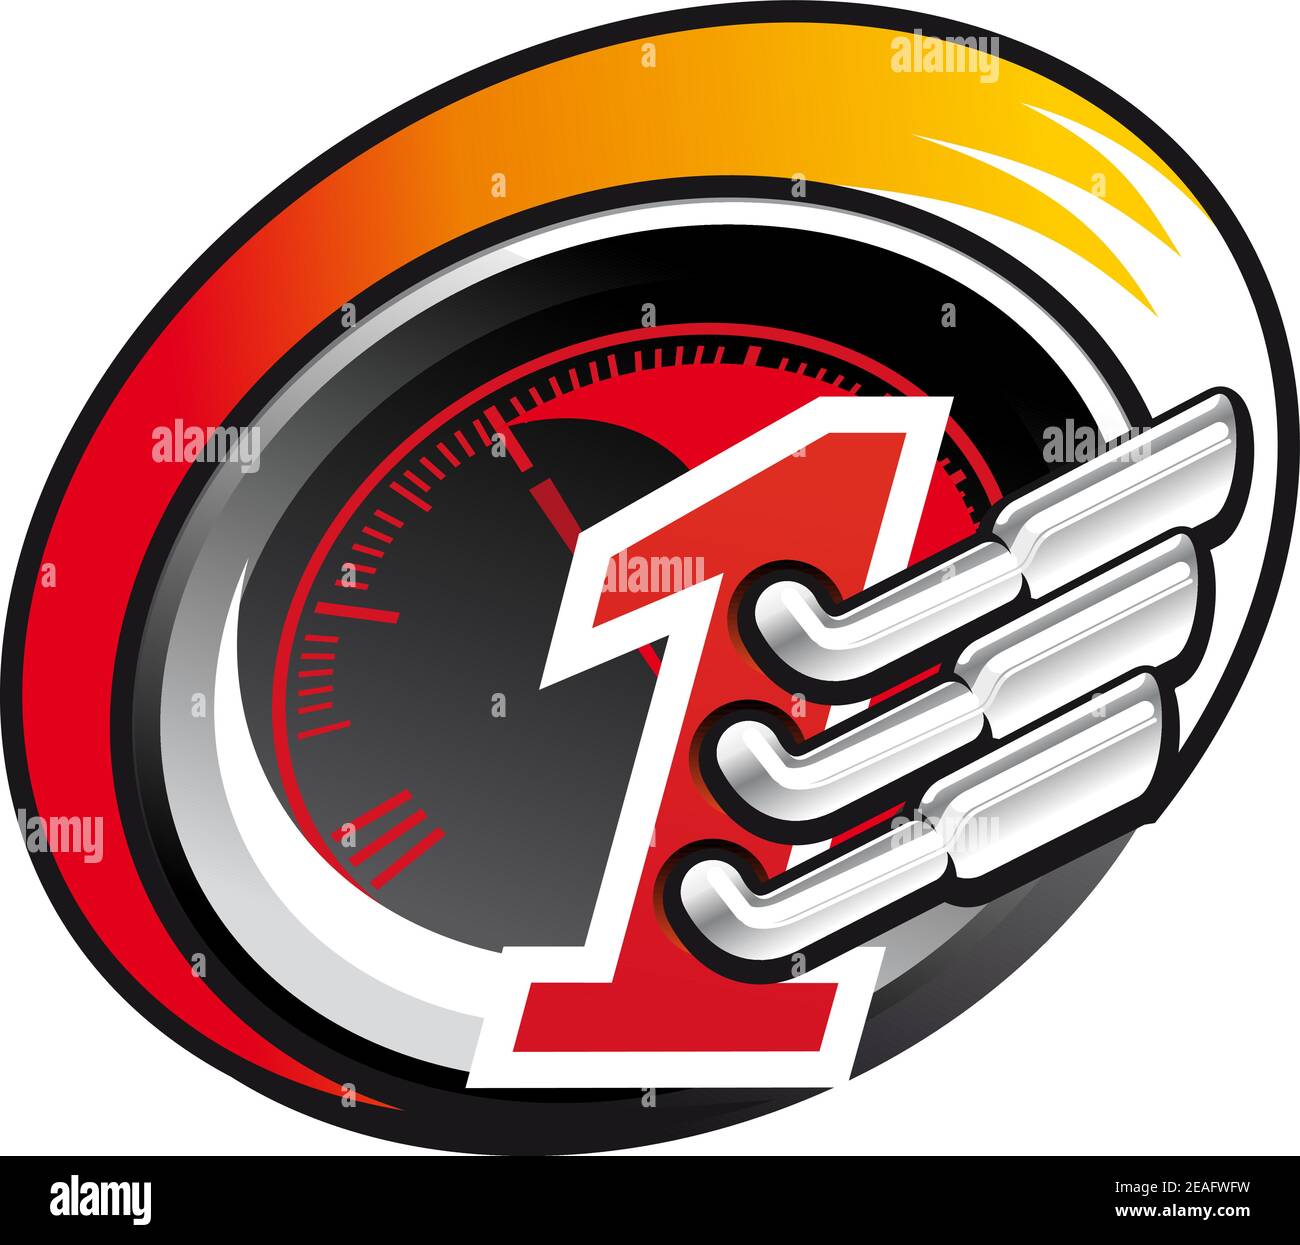 Formula One racing icon with exhaust pipes over a speedometer used in motor racing on the circuit, colourful illustration on white Stock Vector